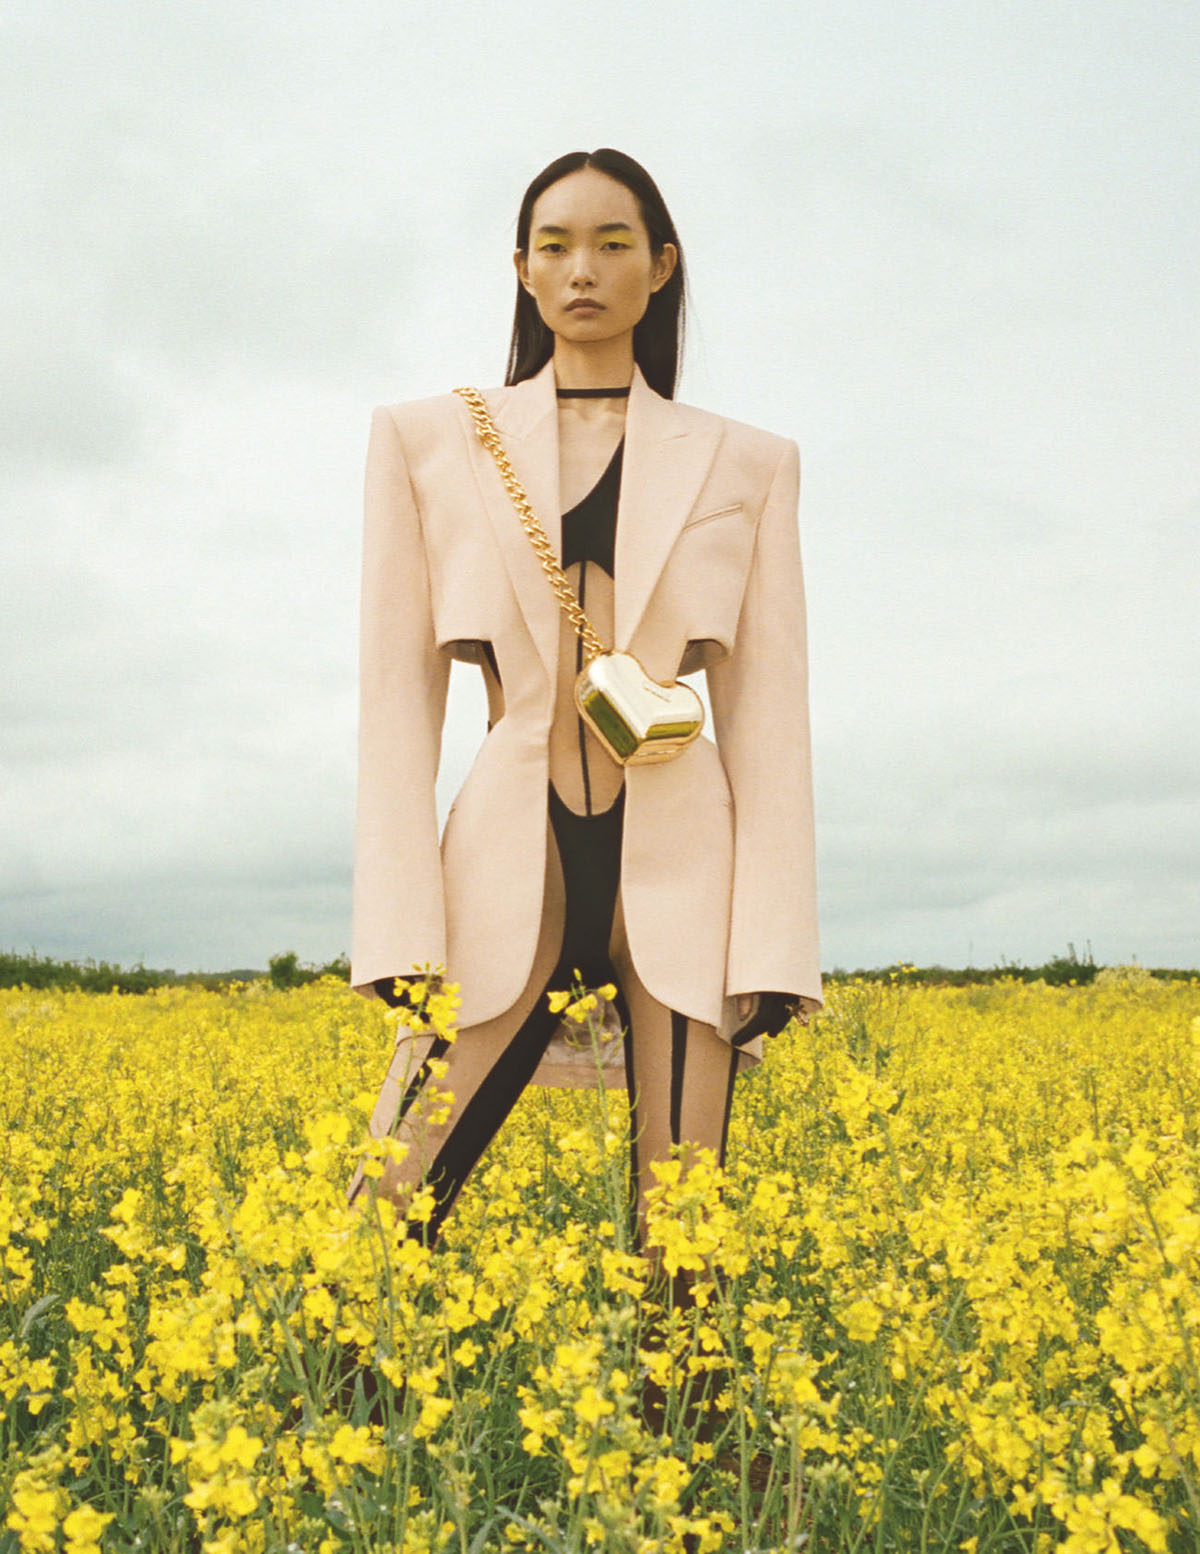 Ling Chen by John-Paul Pietrus for Vogue Singapore July August 2021